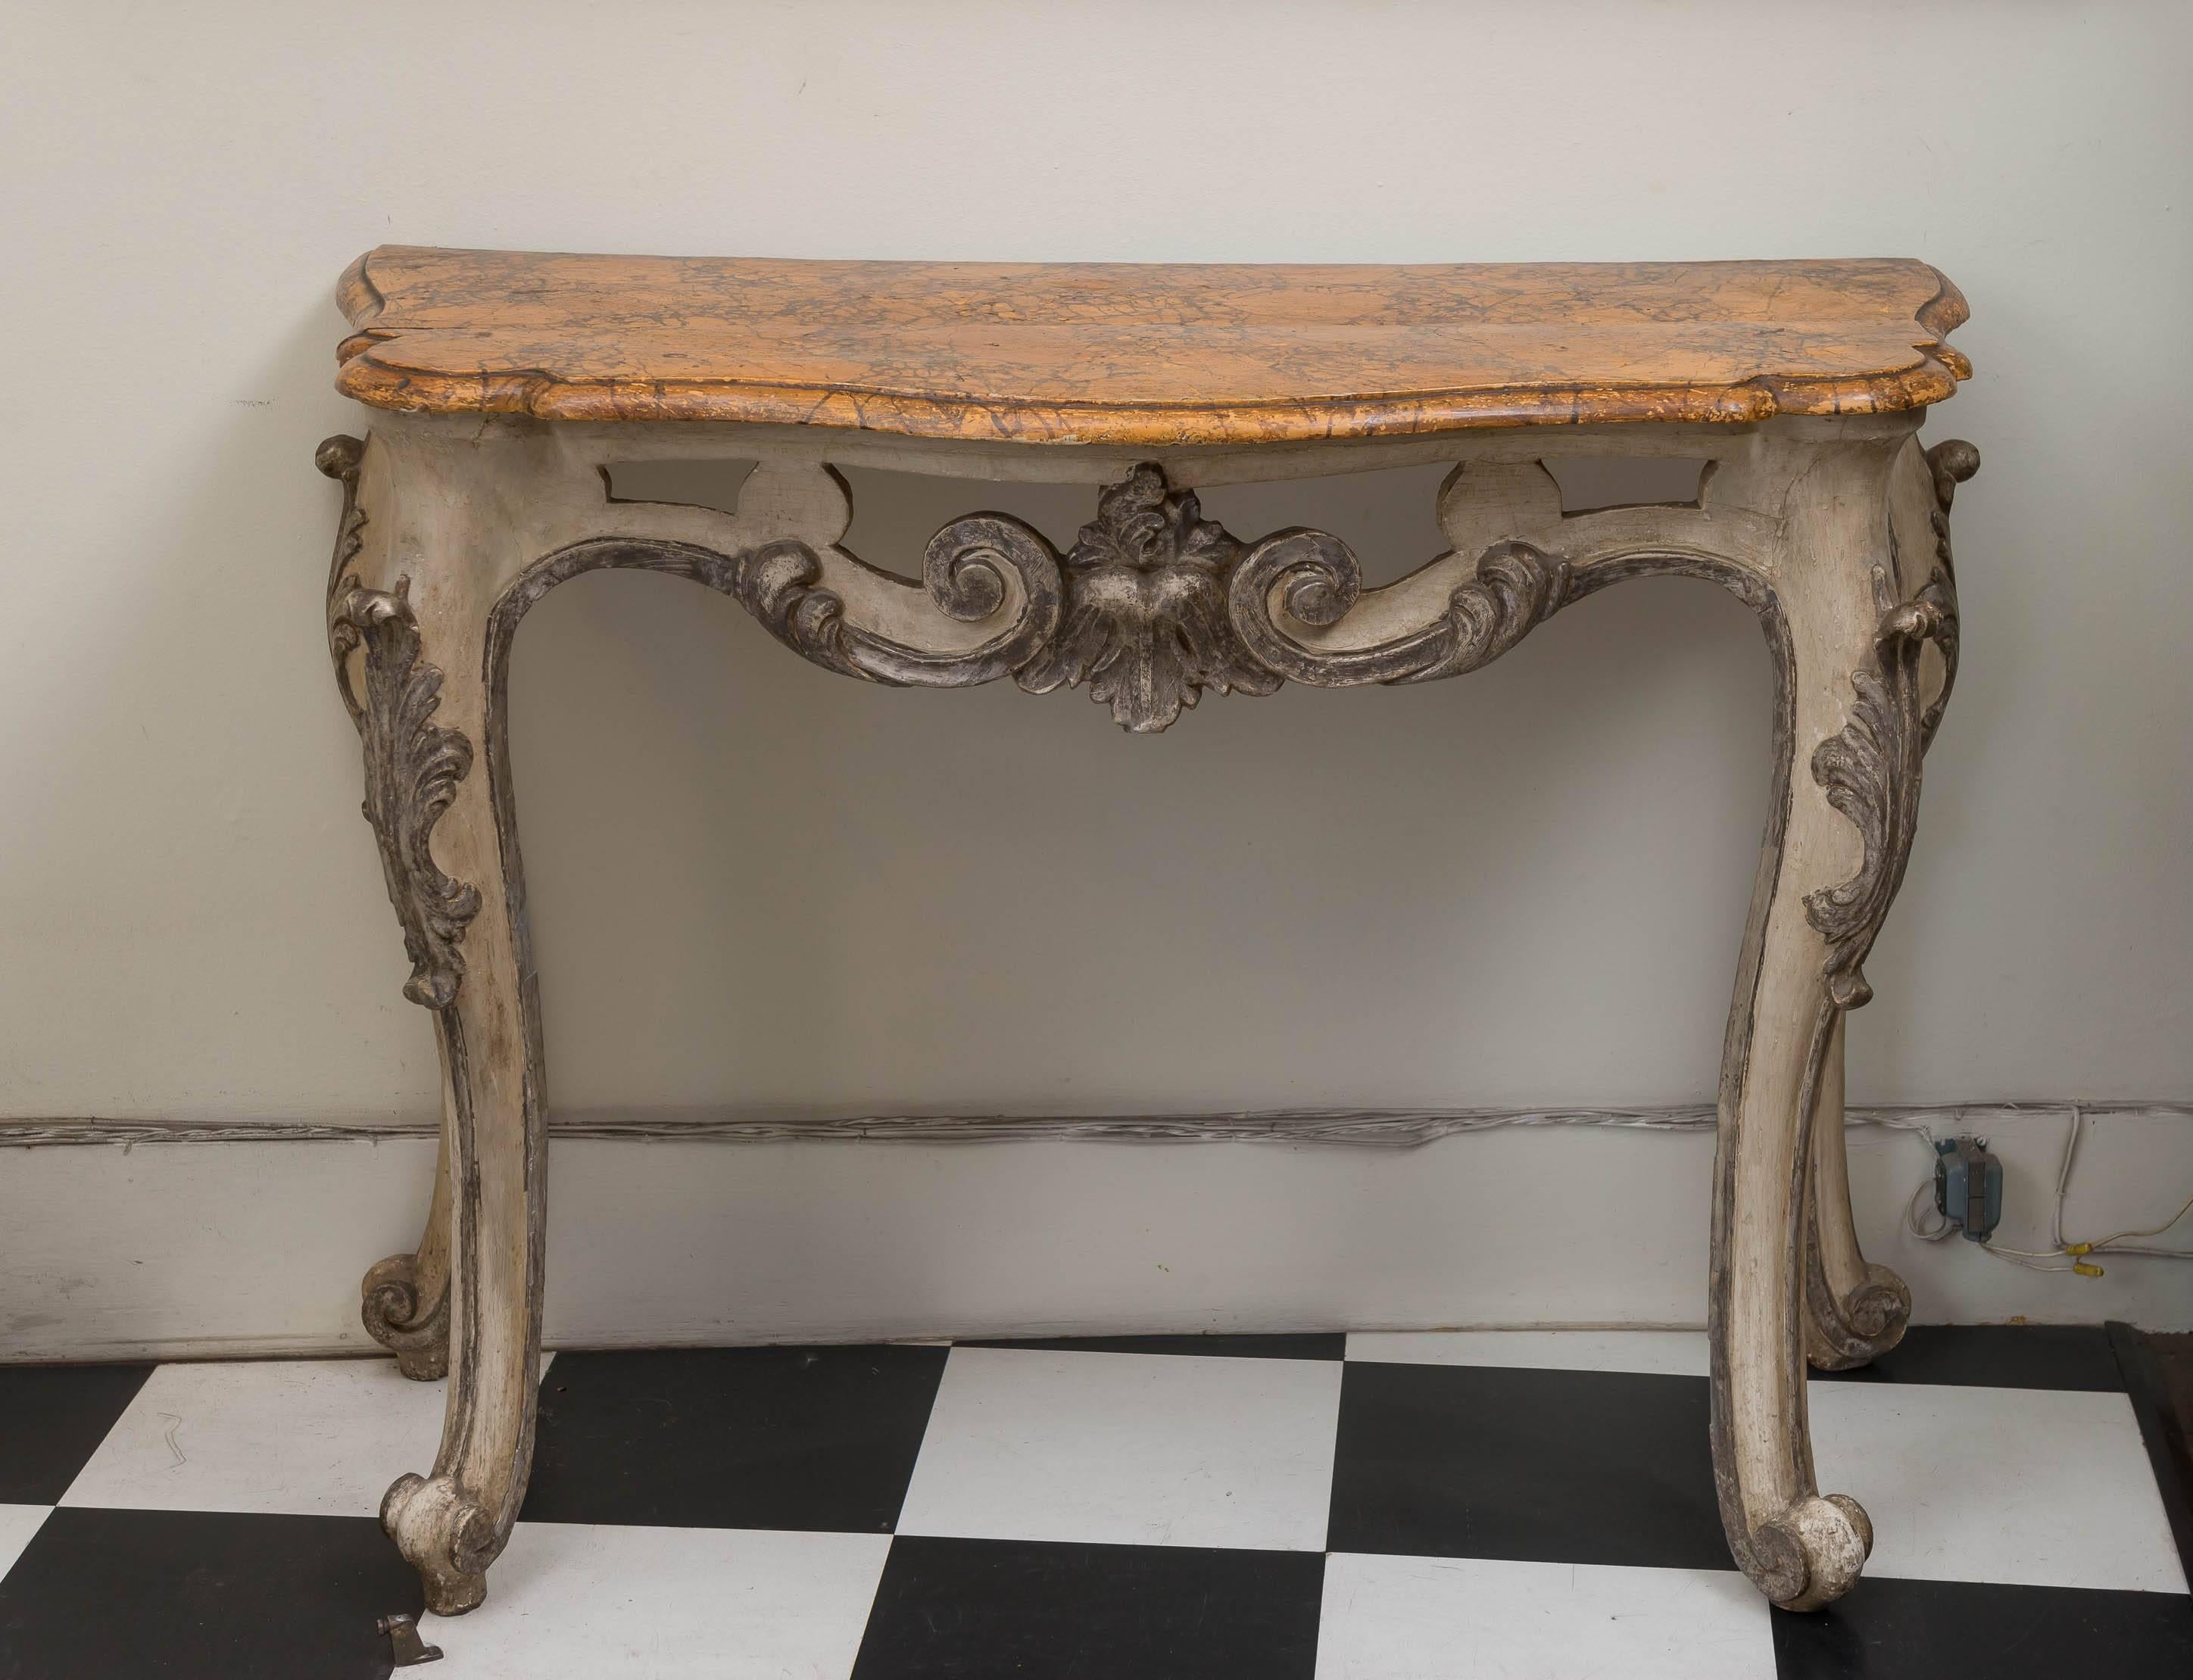 18th century Italian carved wood, paint and silver gilt console table, circa 1775. Good proportions with carved, embellished, bold cabriole legs terminating in a raised volute foot. Faux Sienna marble top of two boards. The two boards separated by a